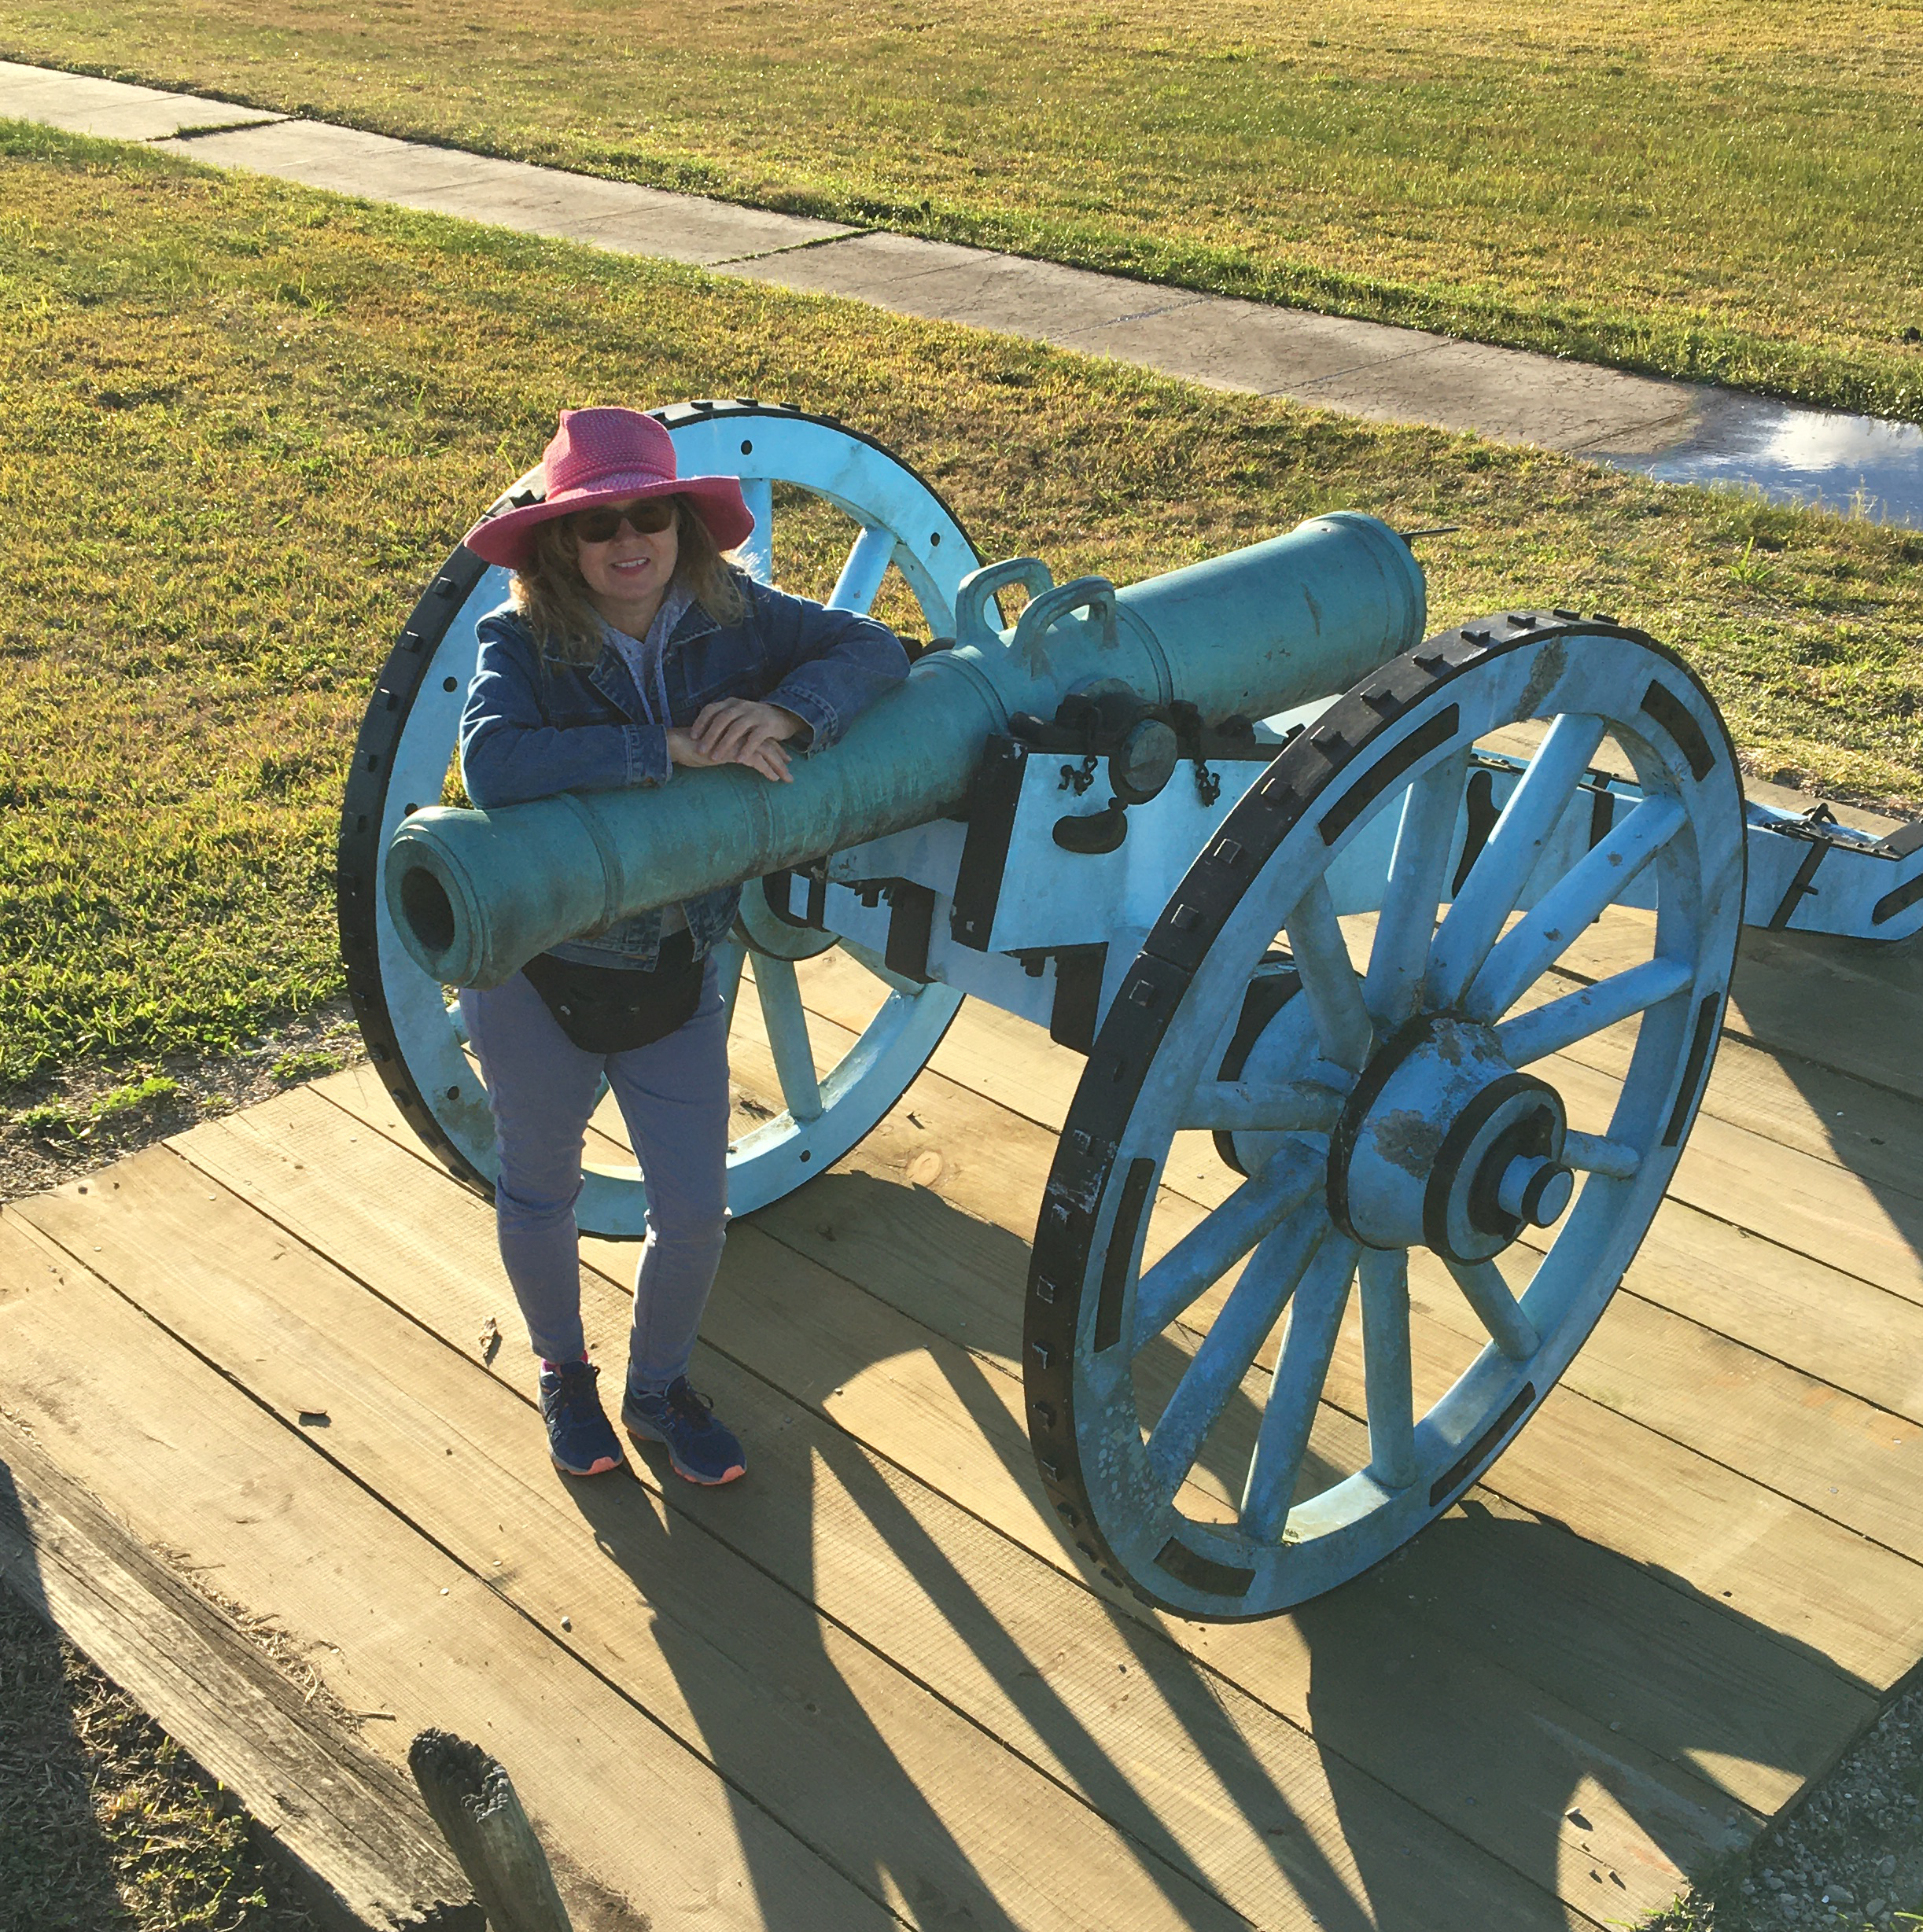 Gina and I went to the Chalmette Battlefield.